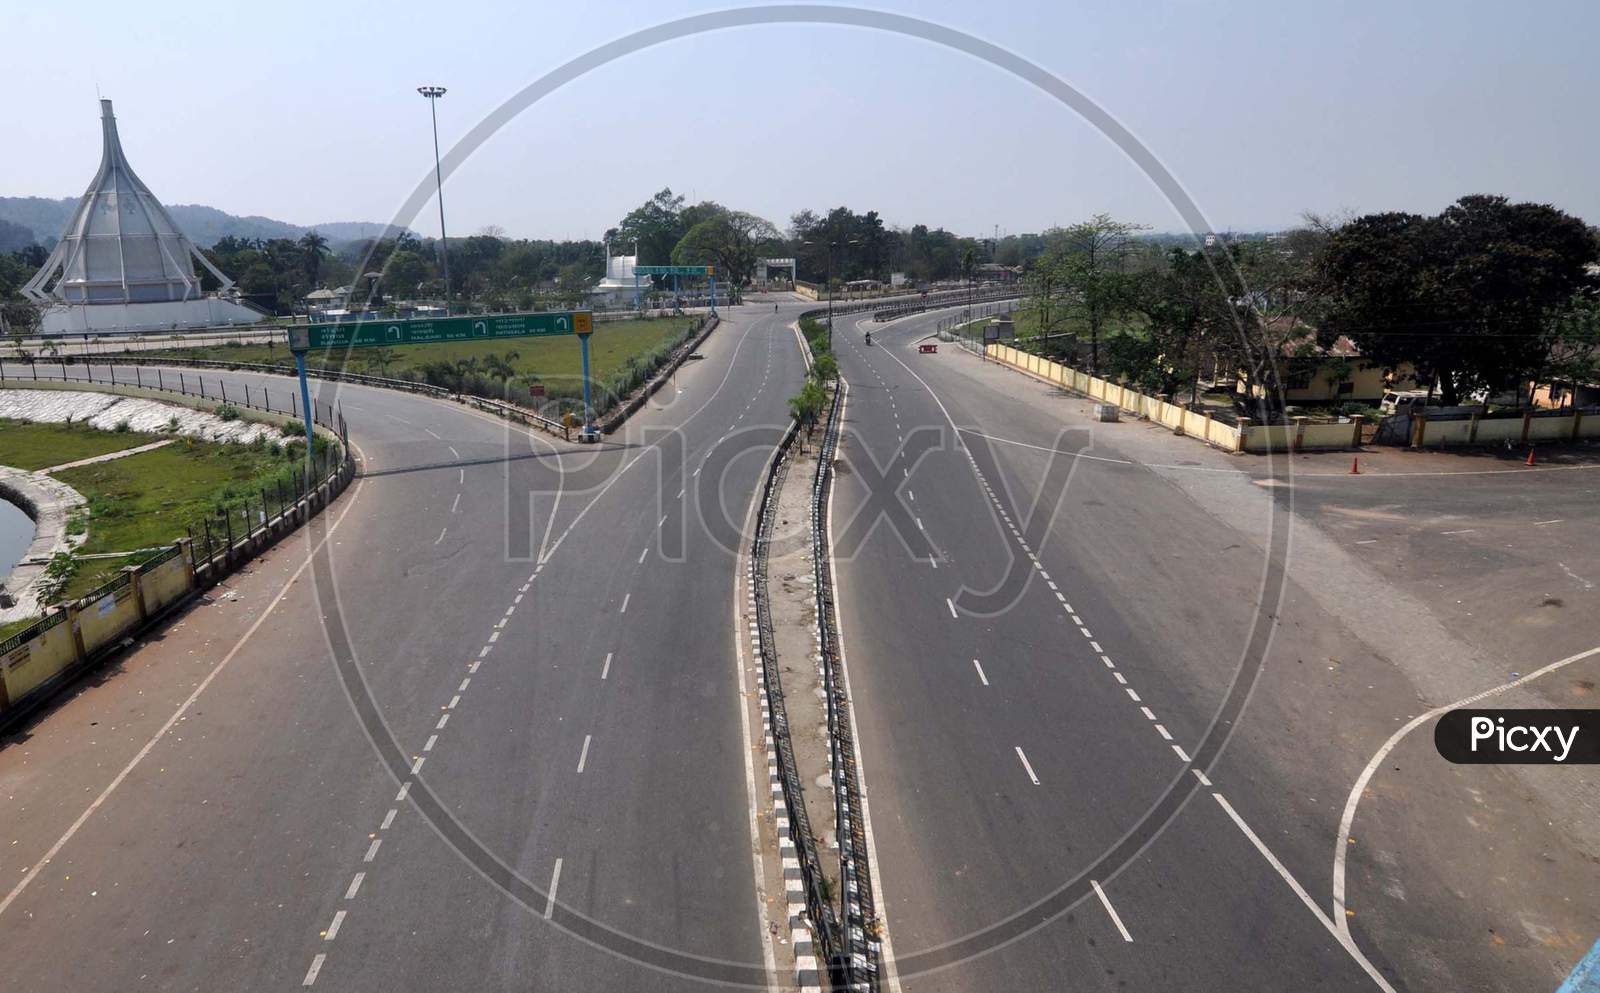 A Deserted Road On The First Day Of 21-Day Complete Lockdown In The Wake Of The Corona Virus Pandemic In Guwahati On Wednesday, 25 March 2020.